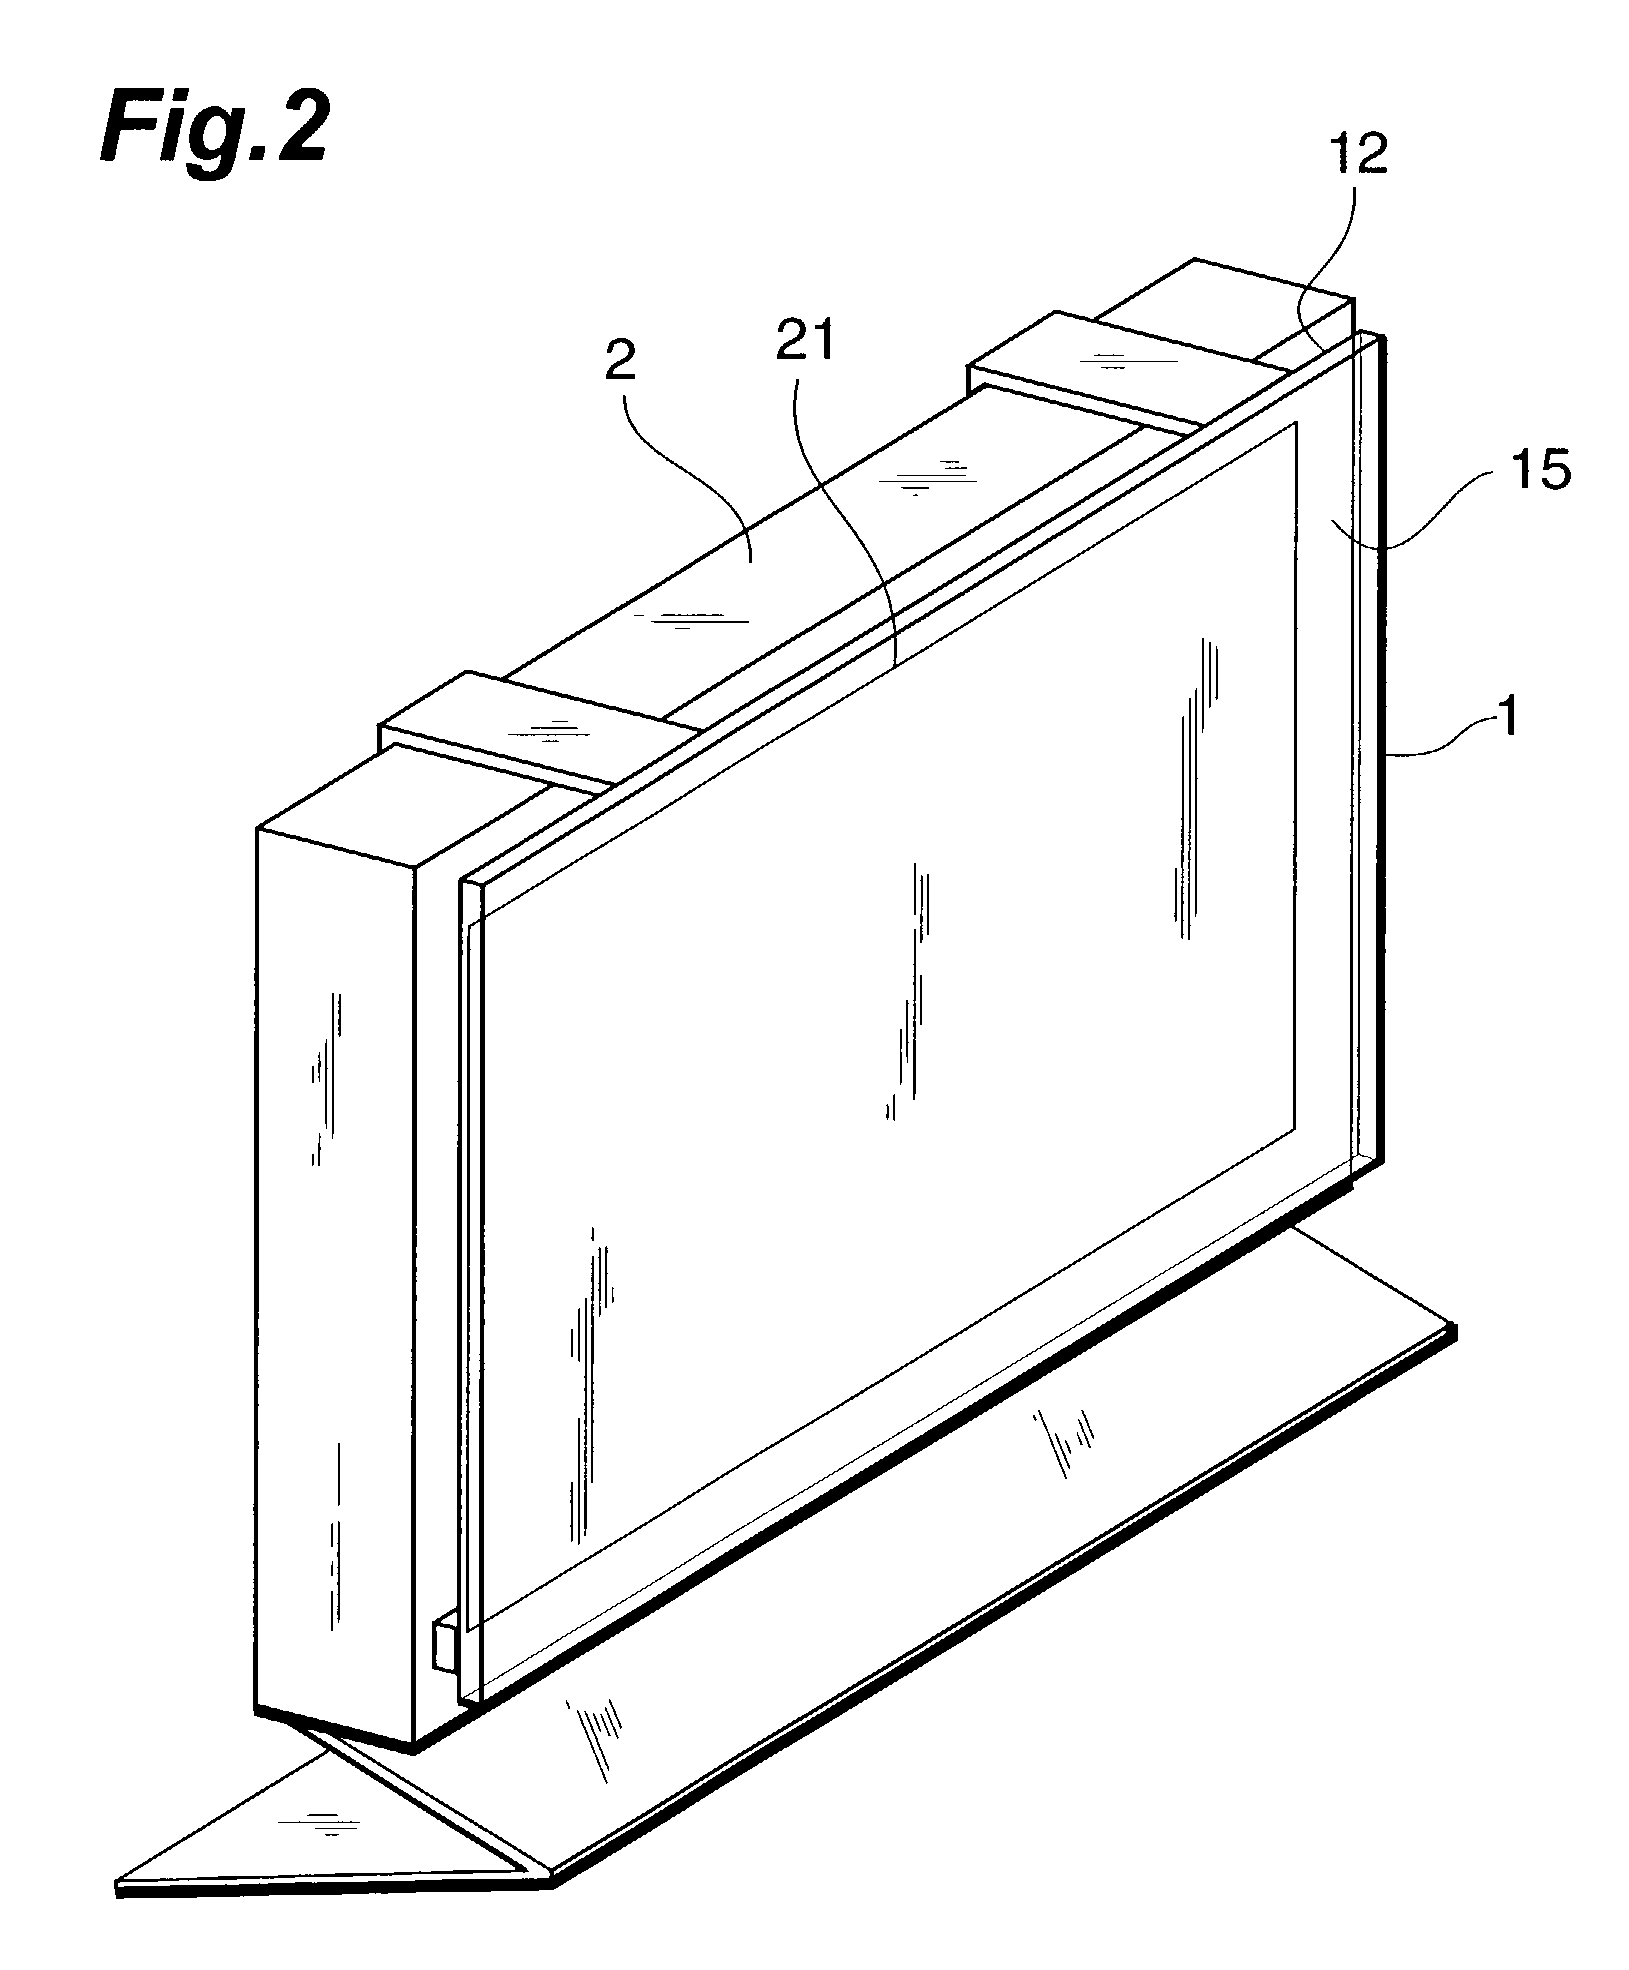 Optical filter and process for producing the same